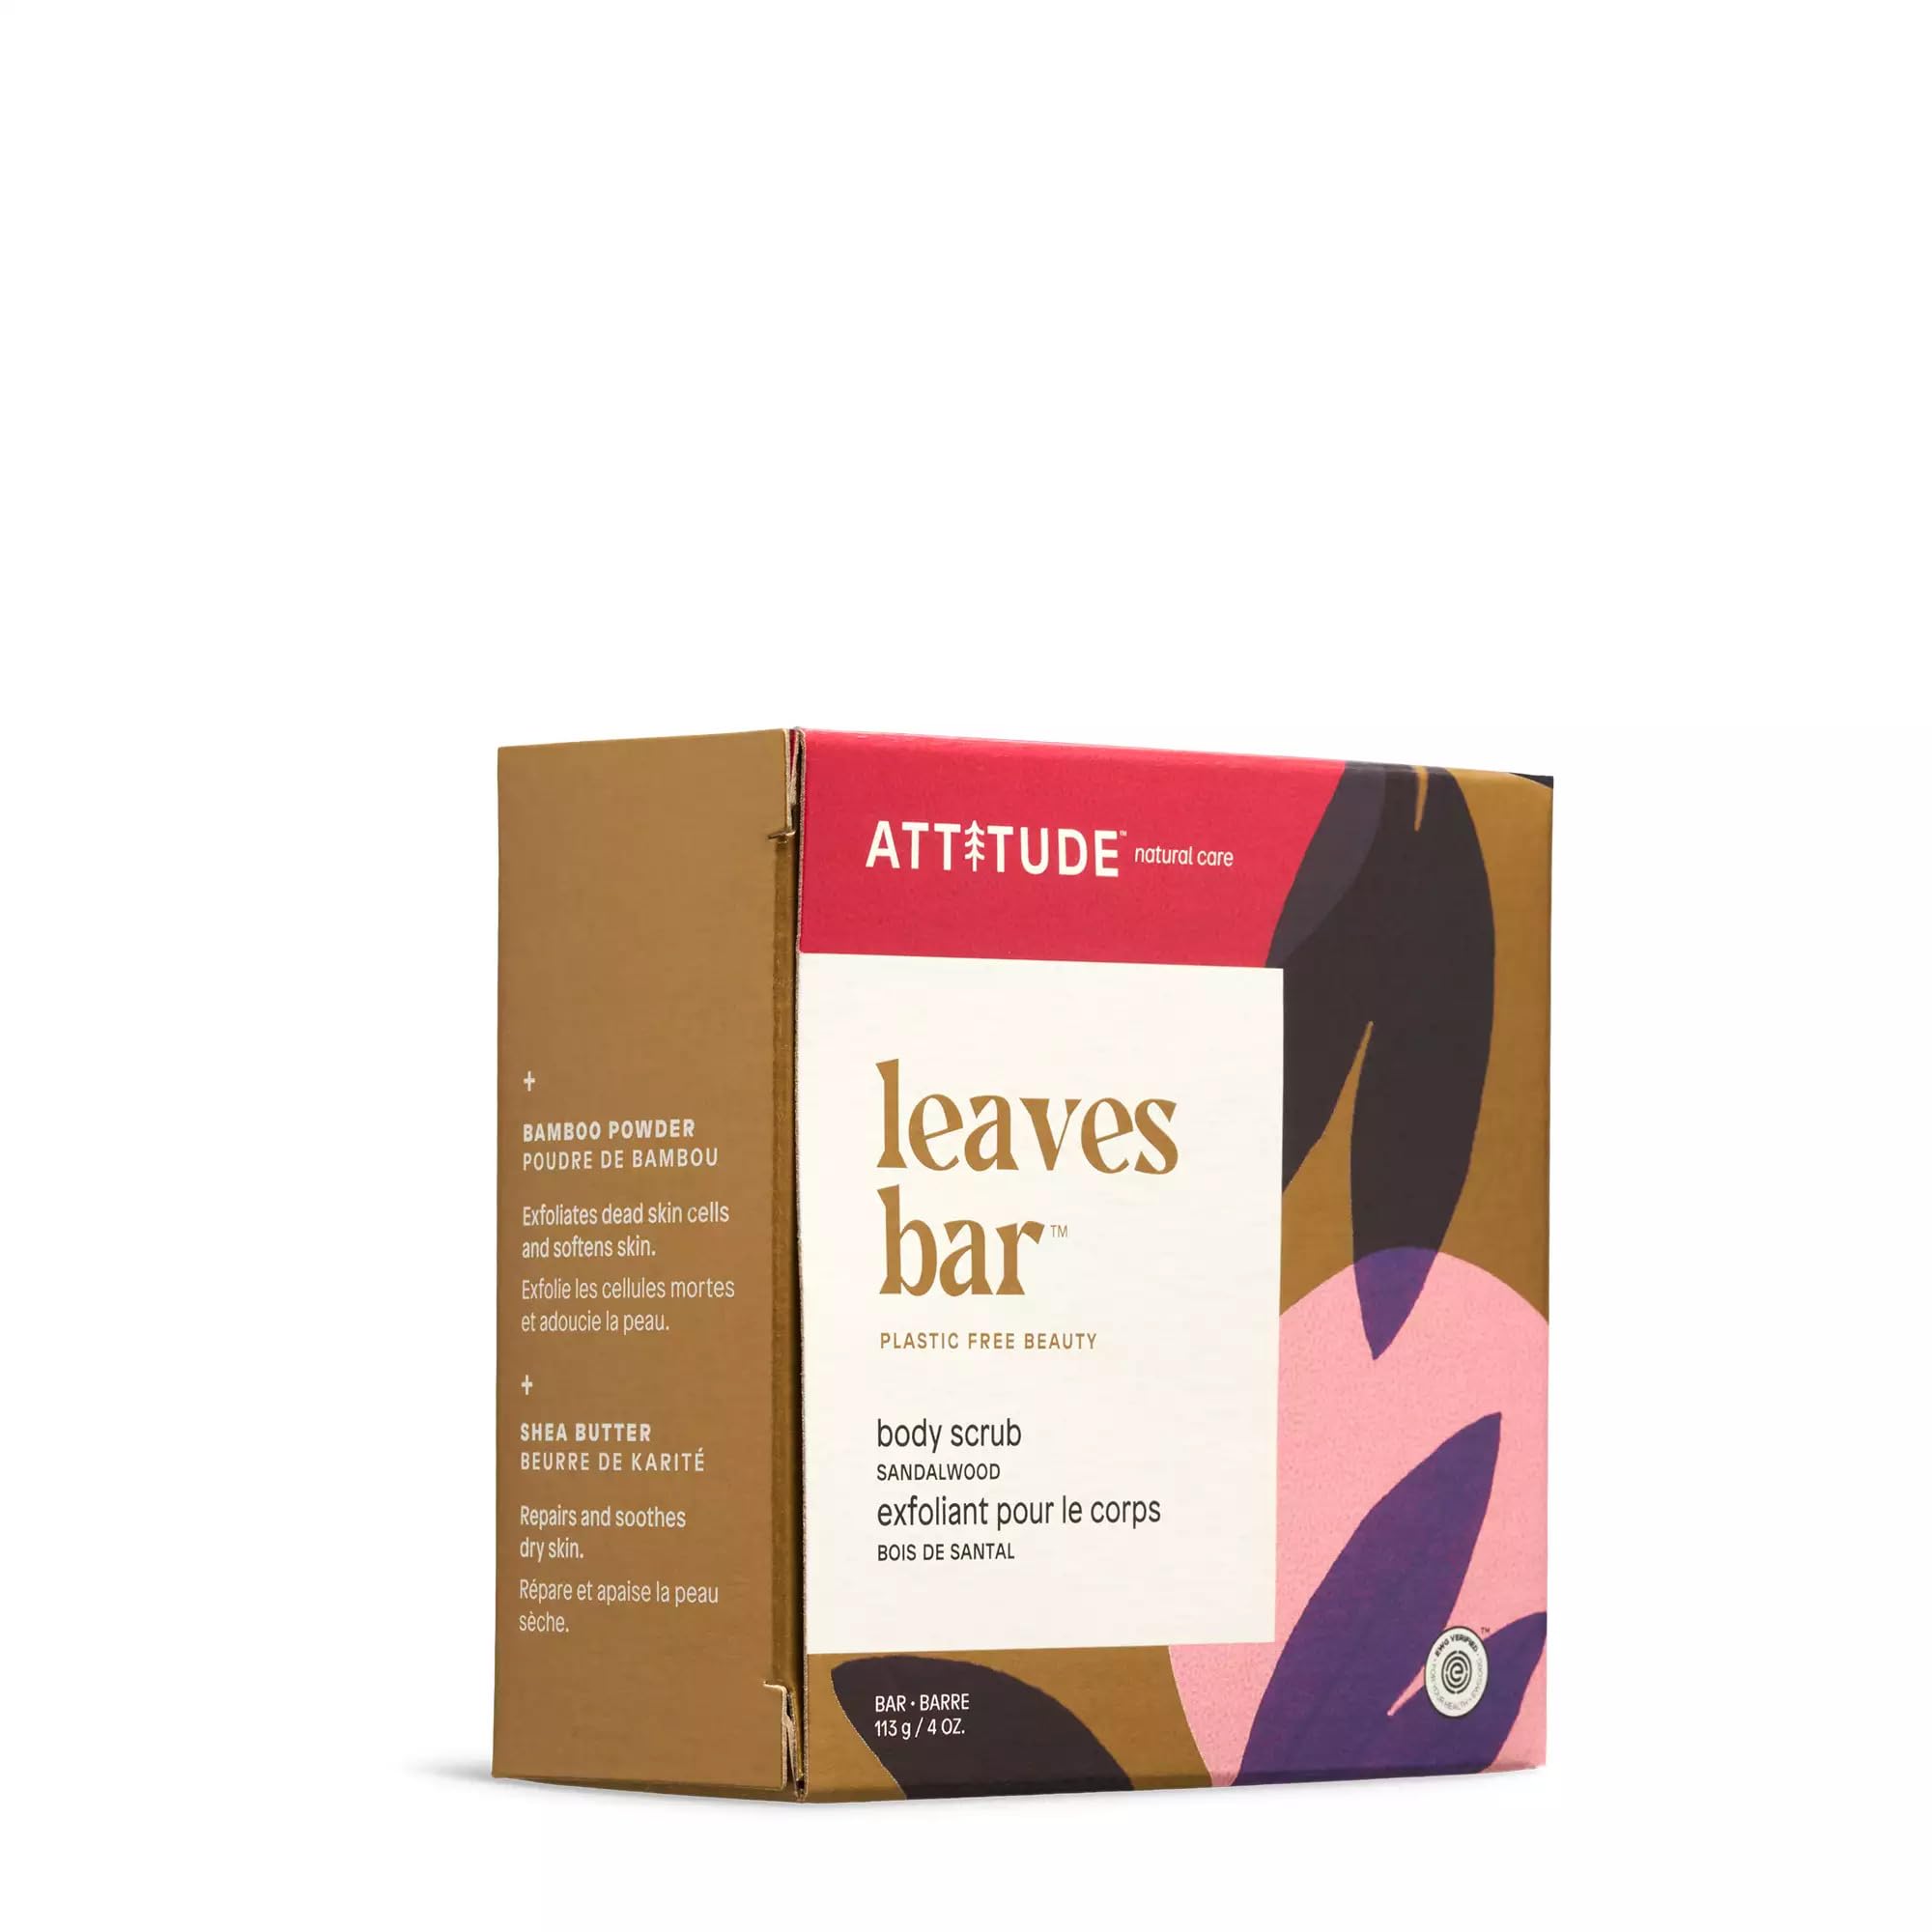 ATTITUDE Body Scrub Bar, Plant and Mineral-Based Ingredients, EWG Verified and Plastic-free Body Care, Vegan and Cruelty-free, Sandalwood, 4 Ounce